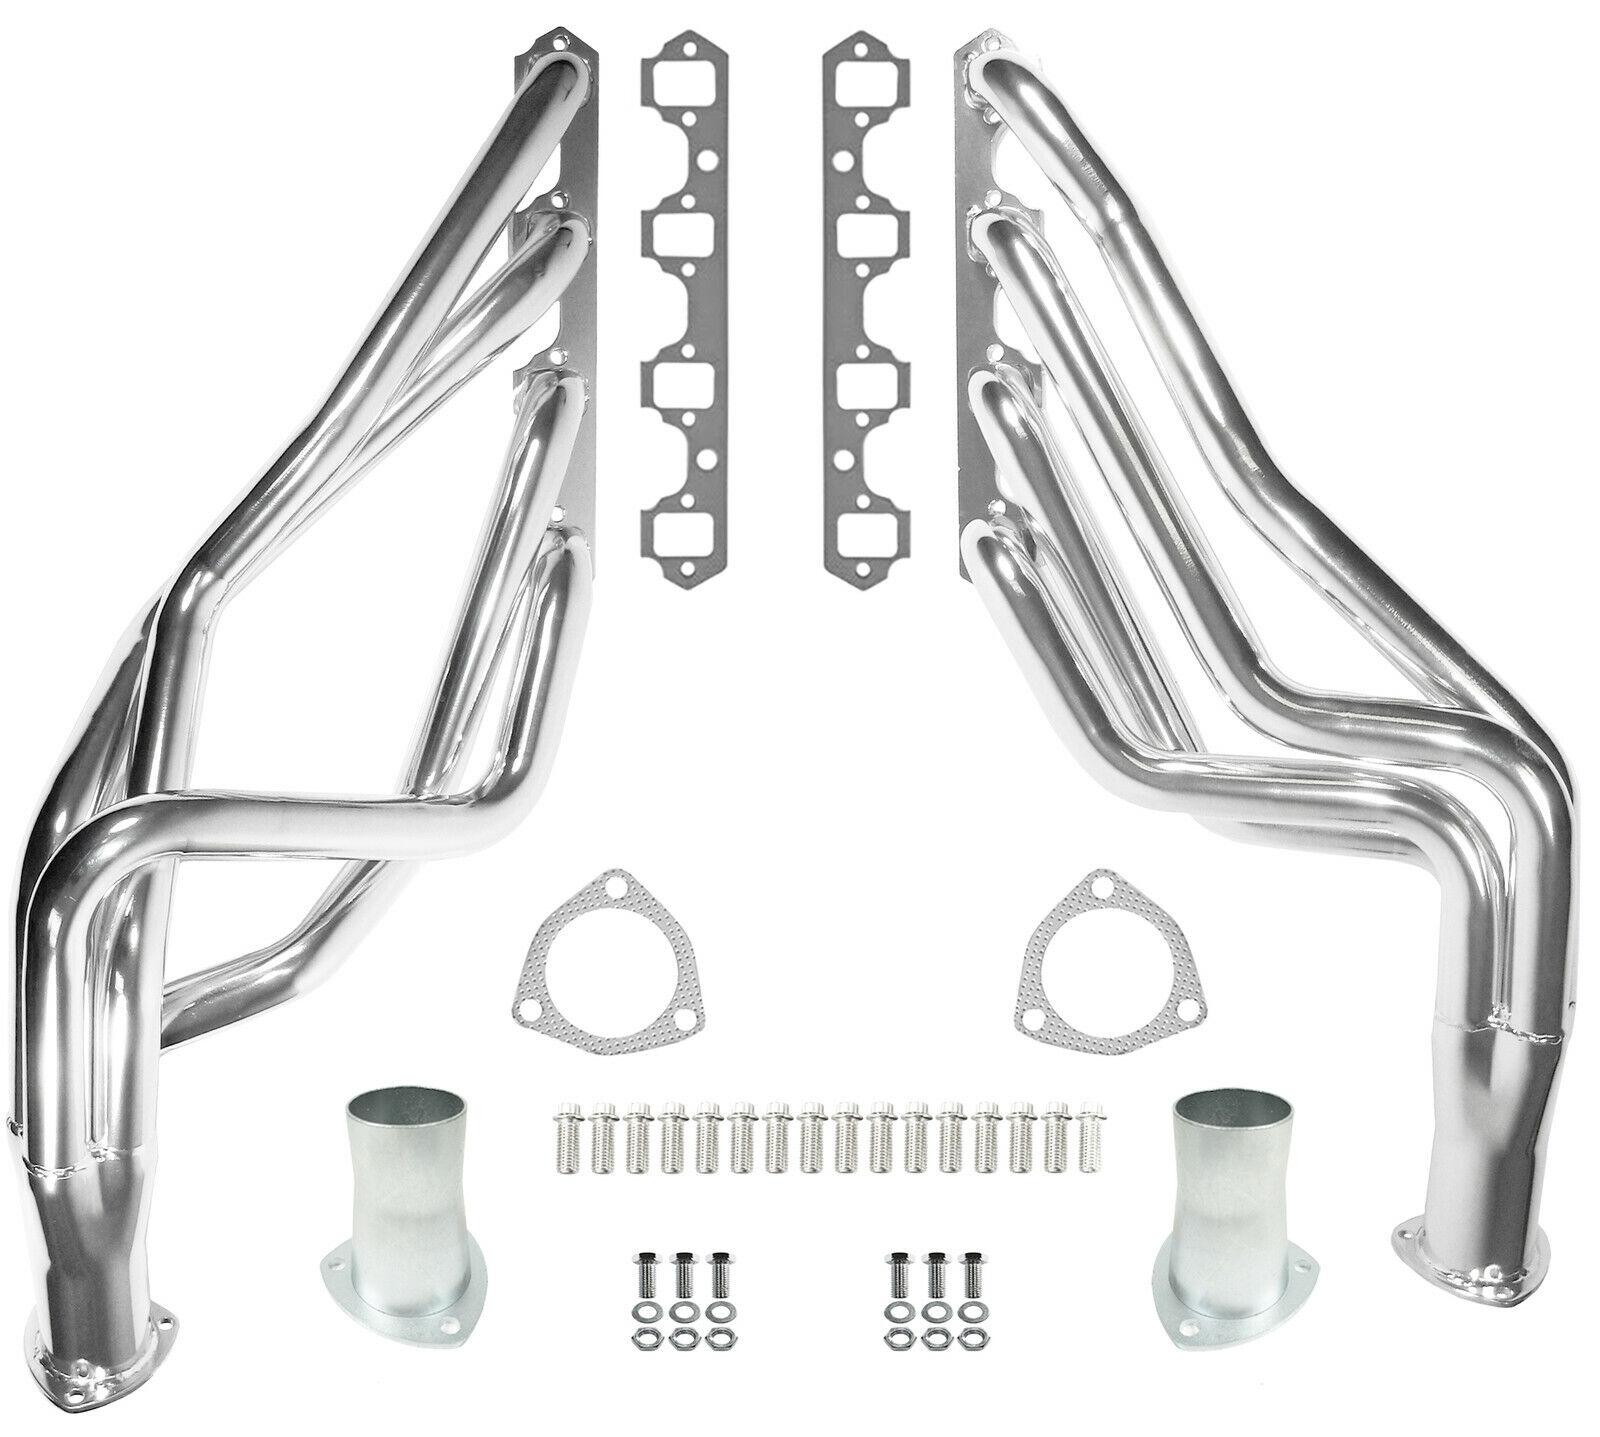 SOUTHWEST SPEED LONG TUBE HEADERS,260-302W,SBF,CHROME,FITS 64-73 MUSTANG,COUGAR